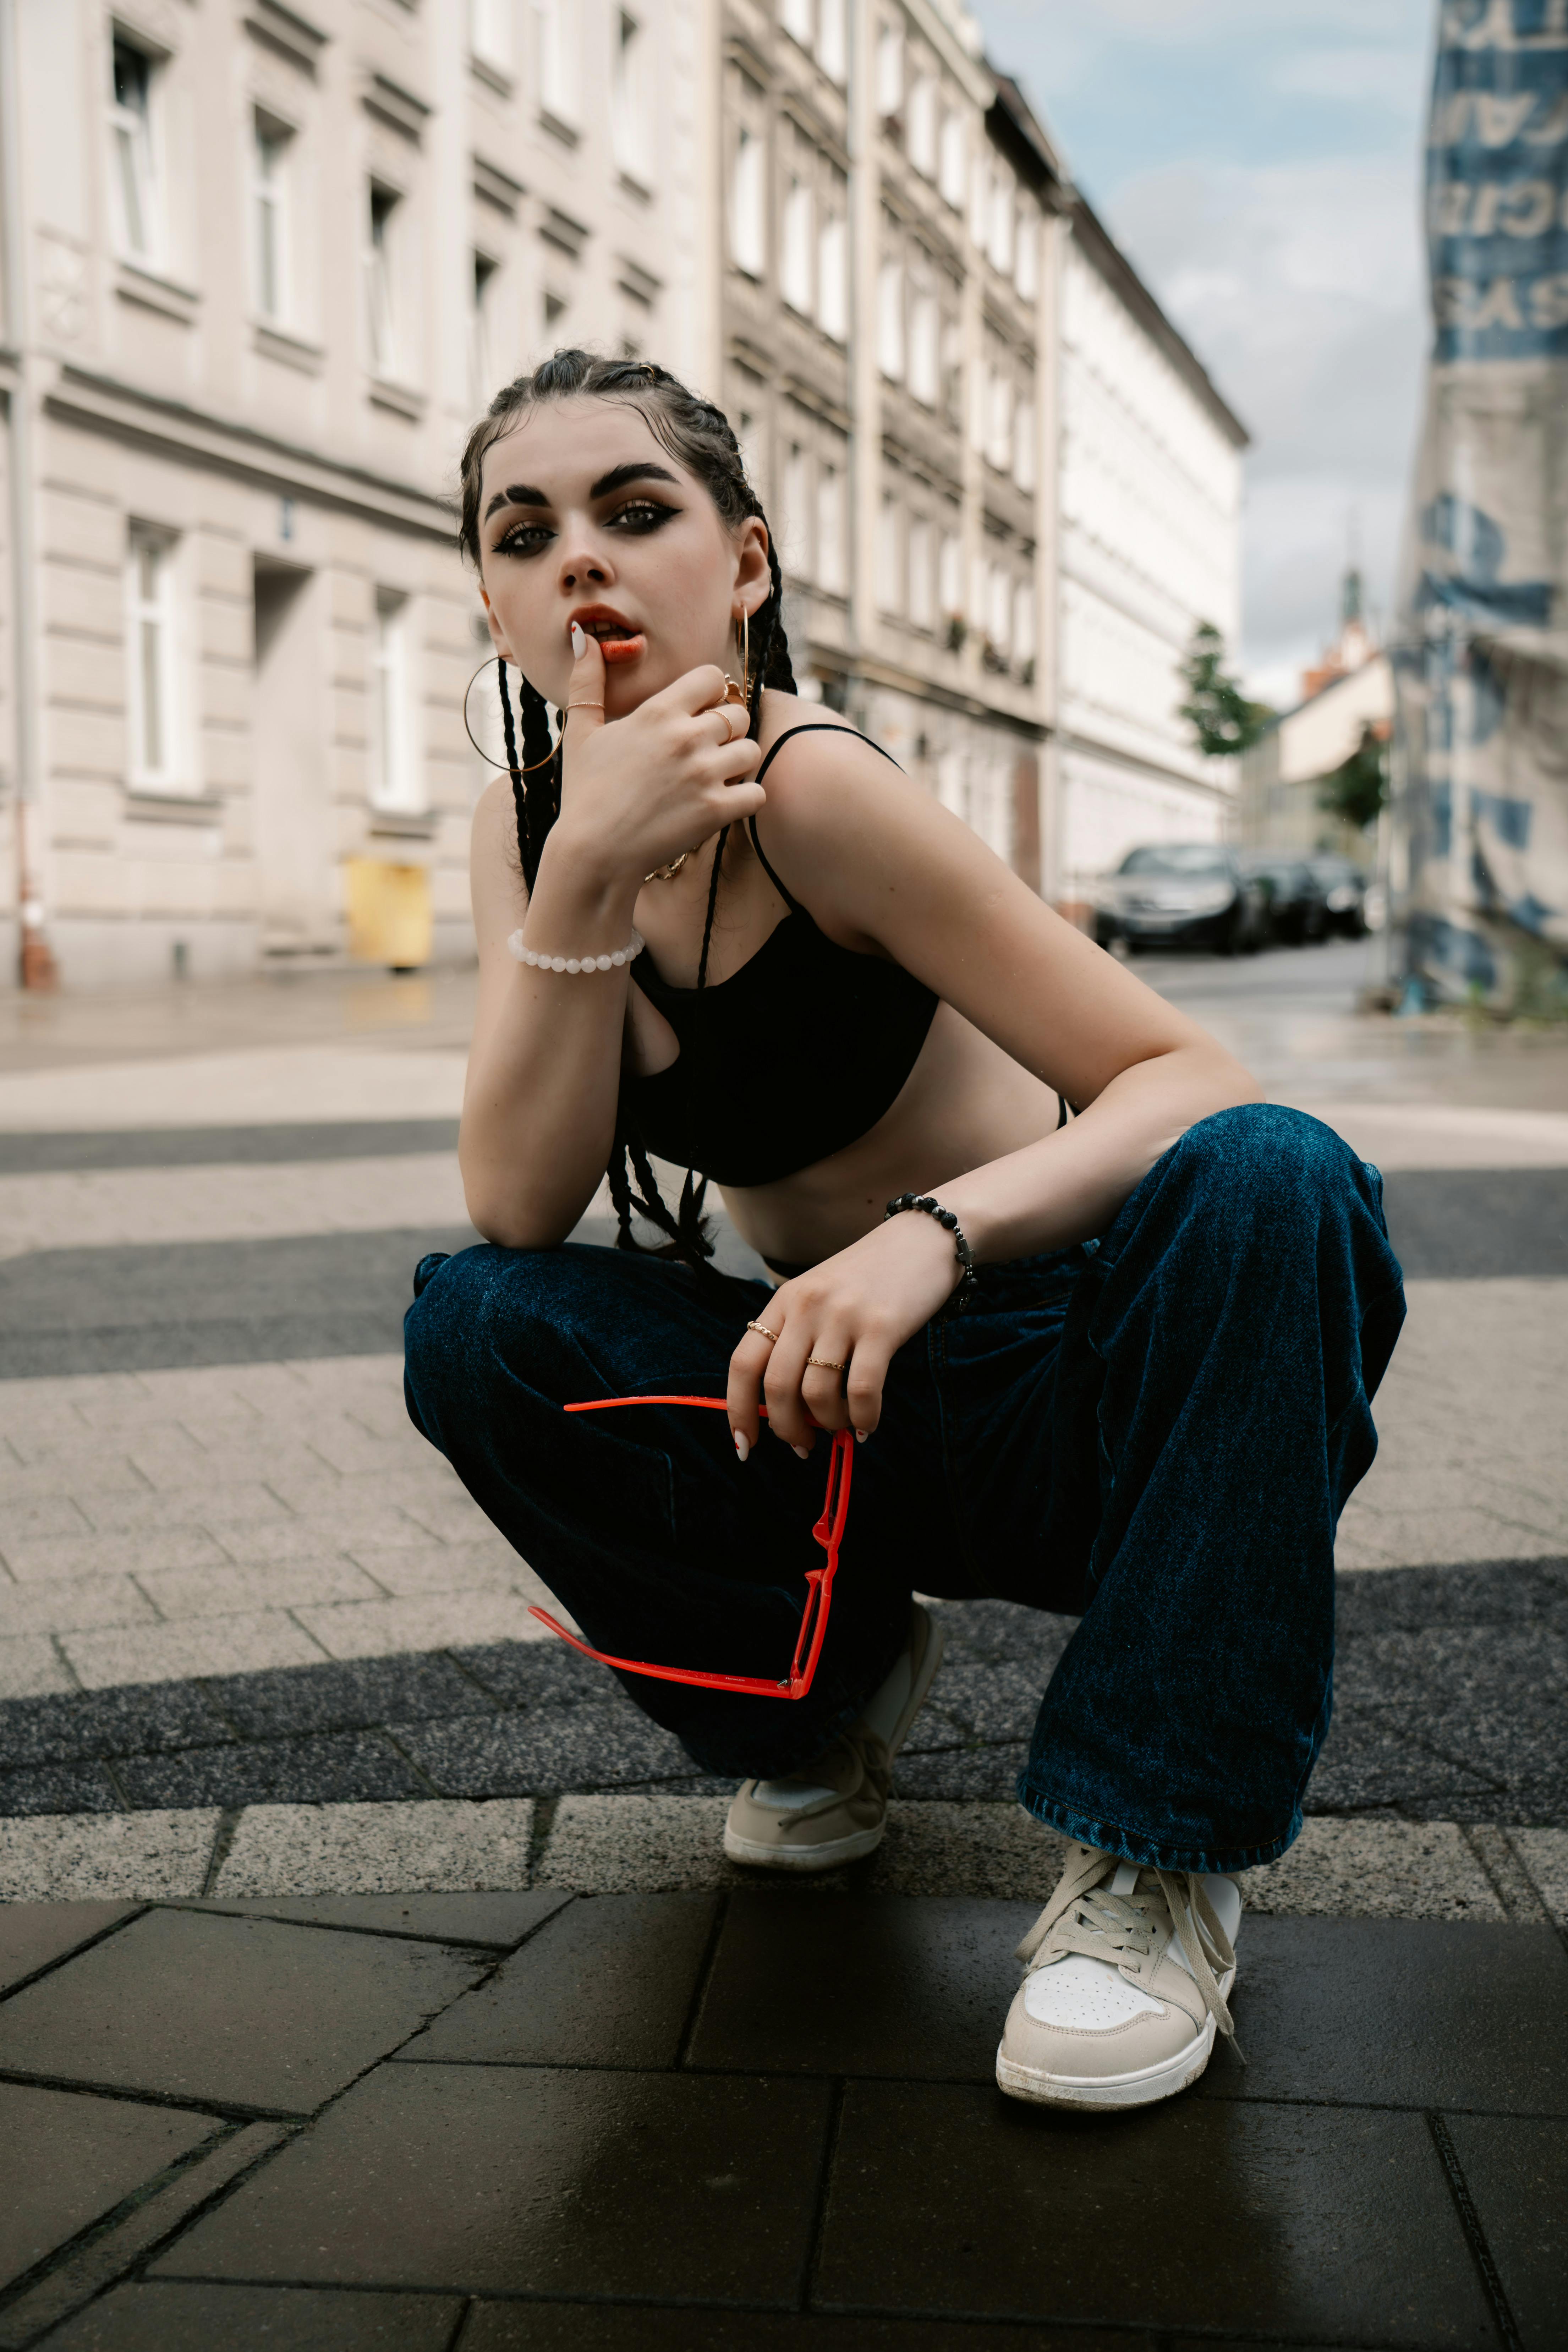 Premium Photo | Fashion beauty and city with a woman or model posing on the  road and street on an urban background style edgy and trendy with a young  female in contemporary